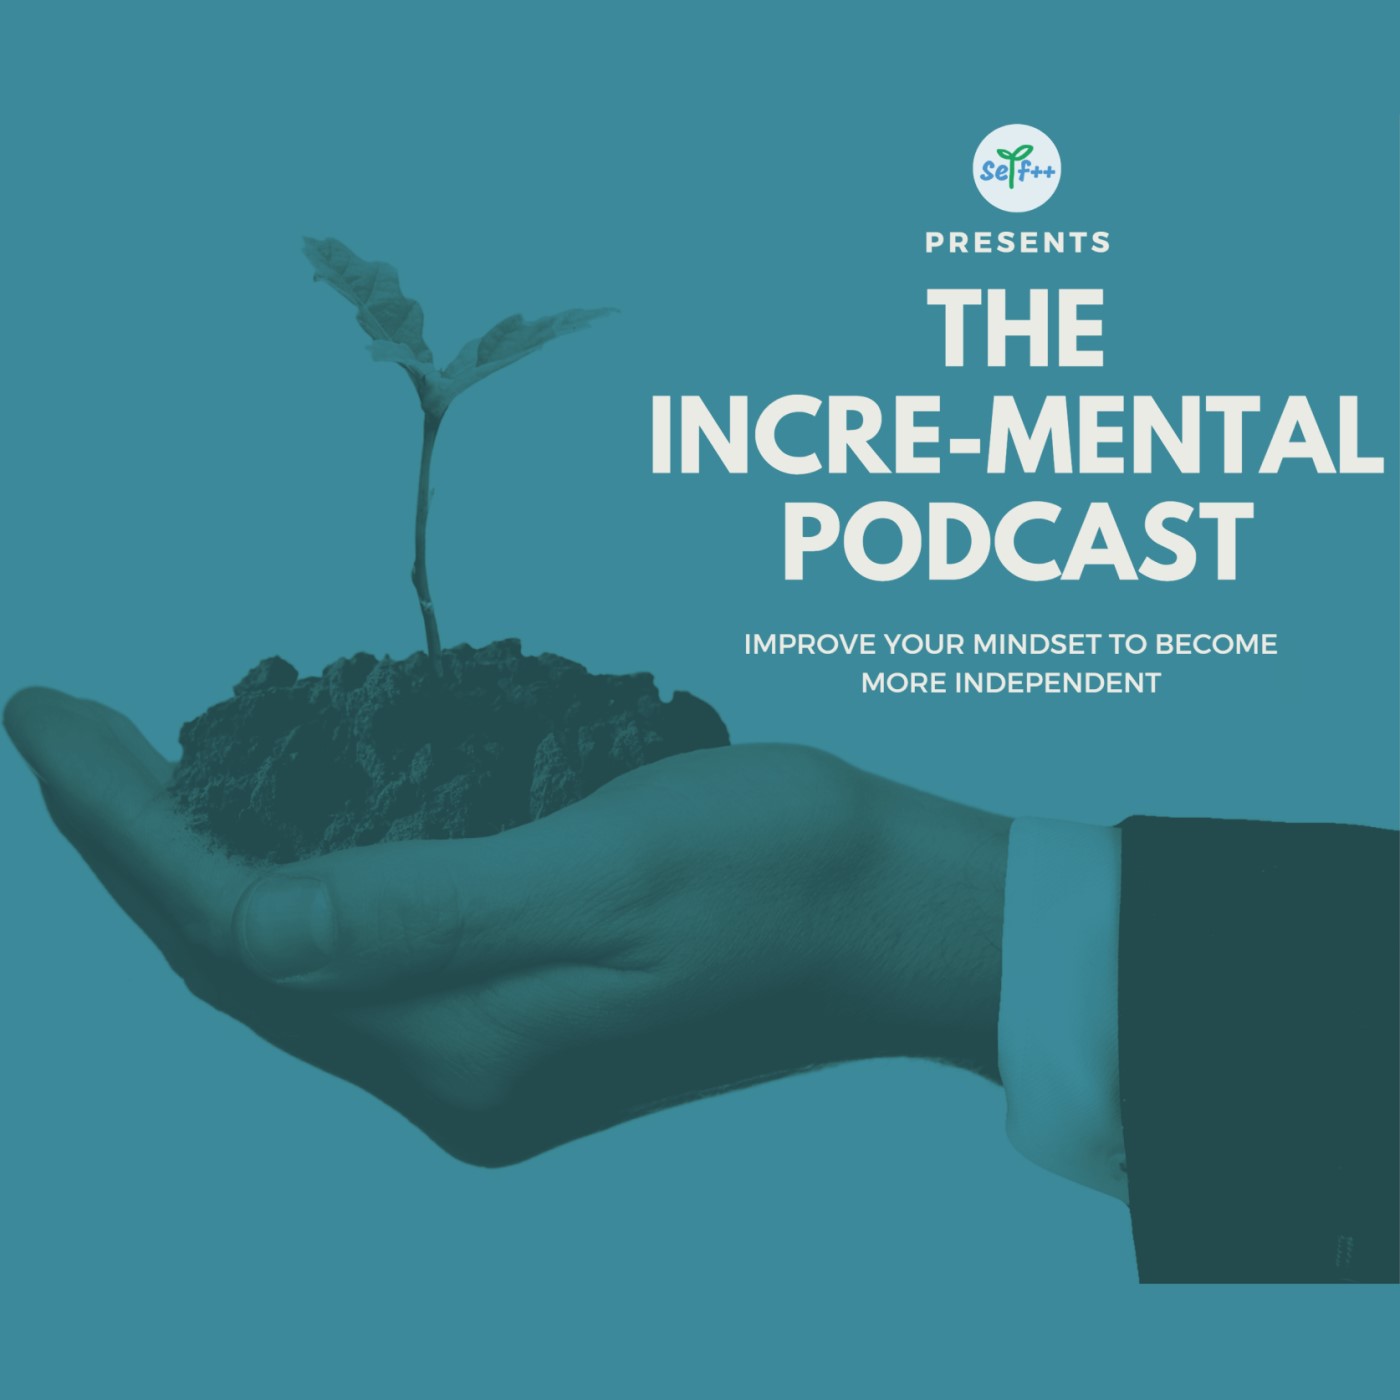 The Incri-mental Podcast: Improve Your Mindset to Become More Independent